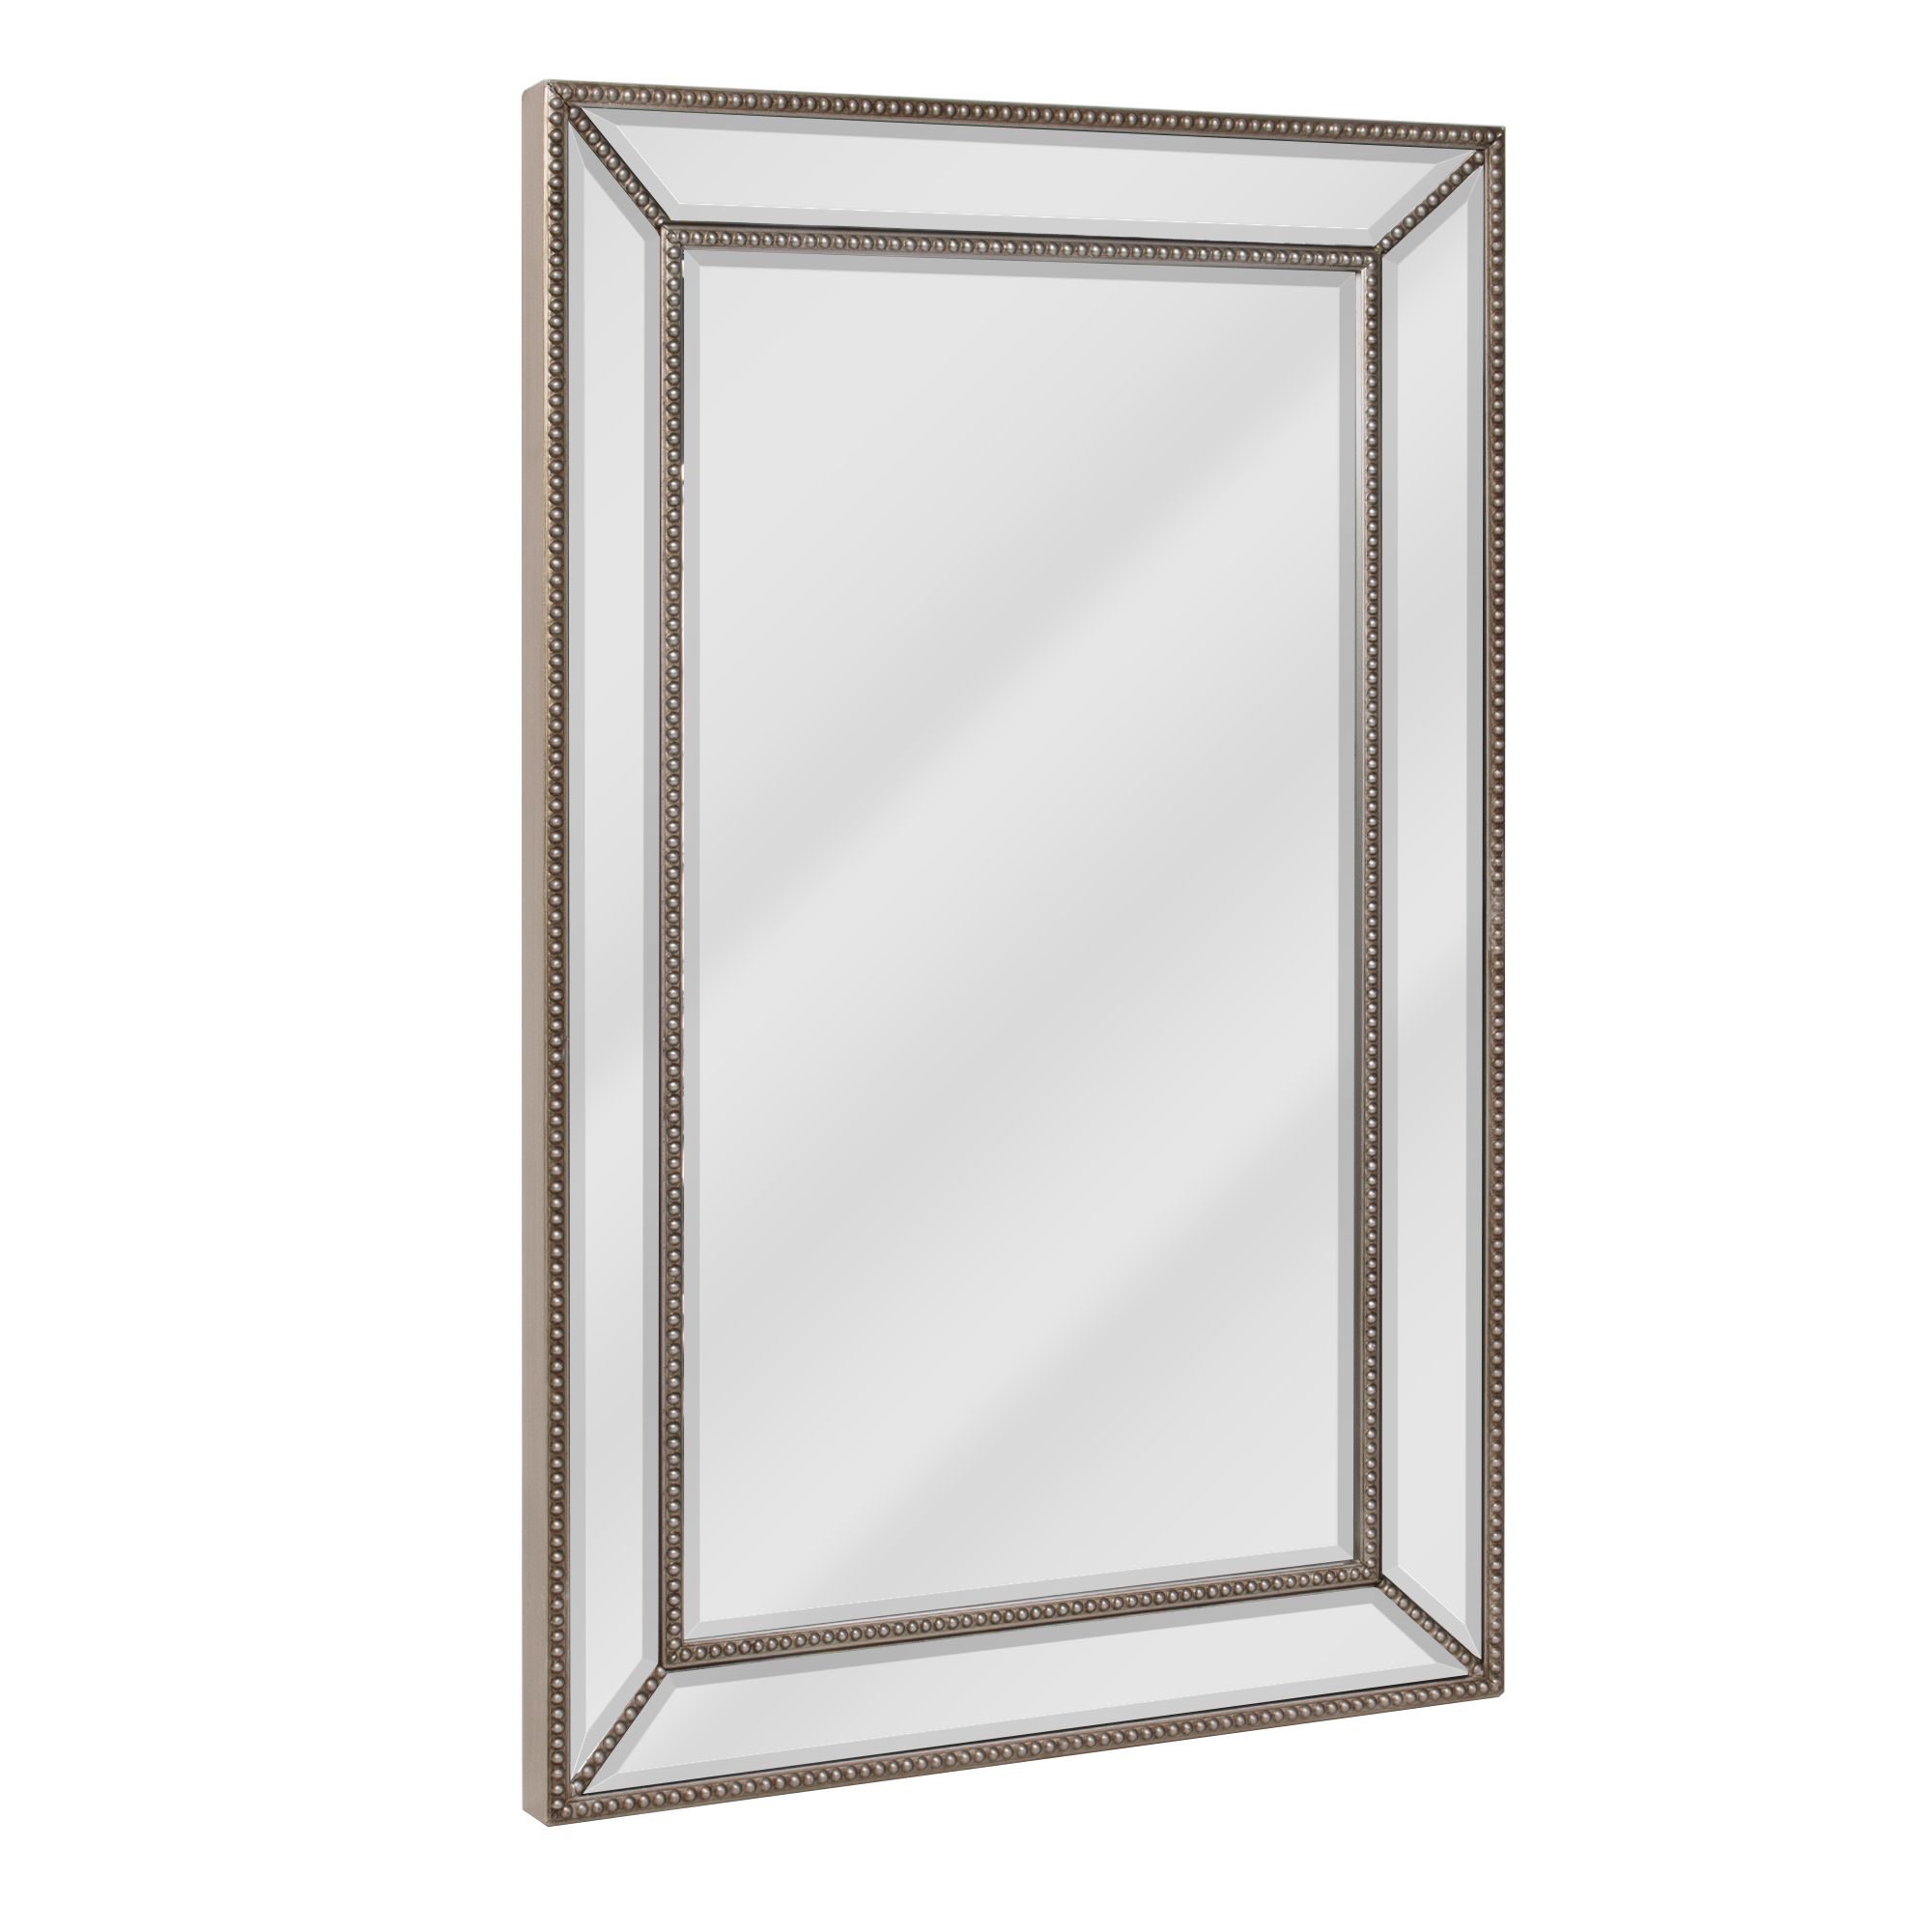 Head West Champagne Silver Beaded Glass Rectangular Framed Beveled In Silver Beveled Wall Mirrors (View 1 of 15)